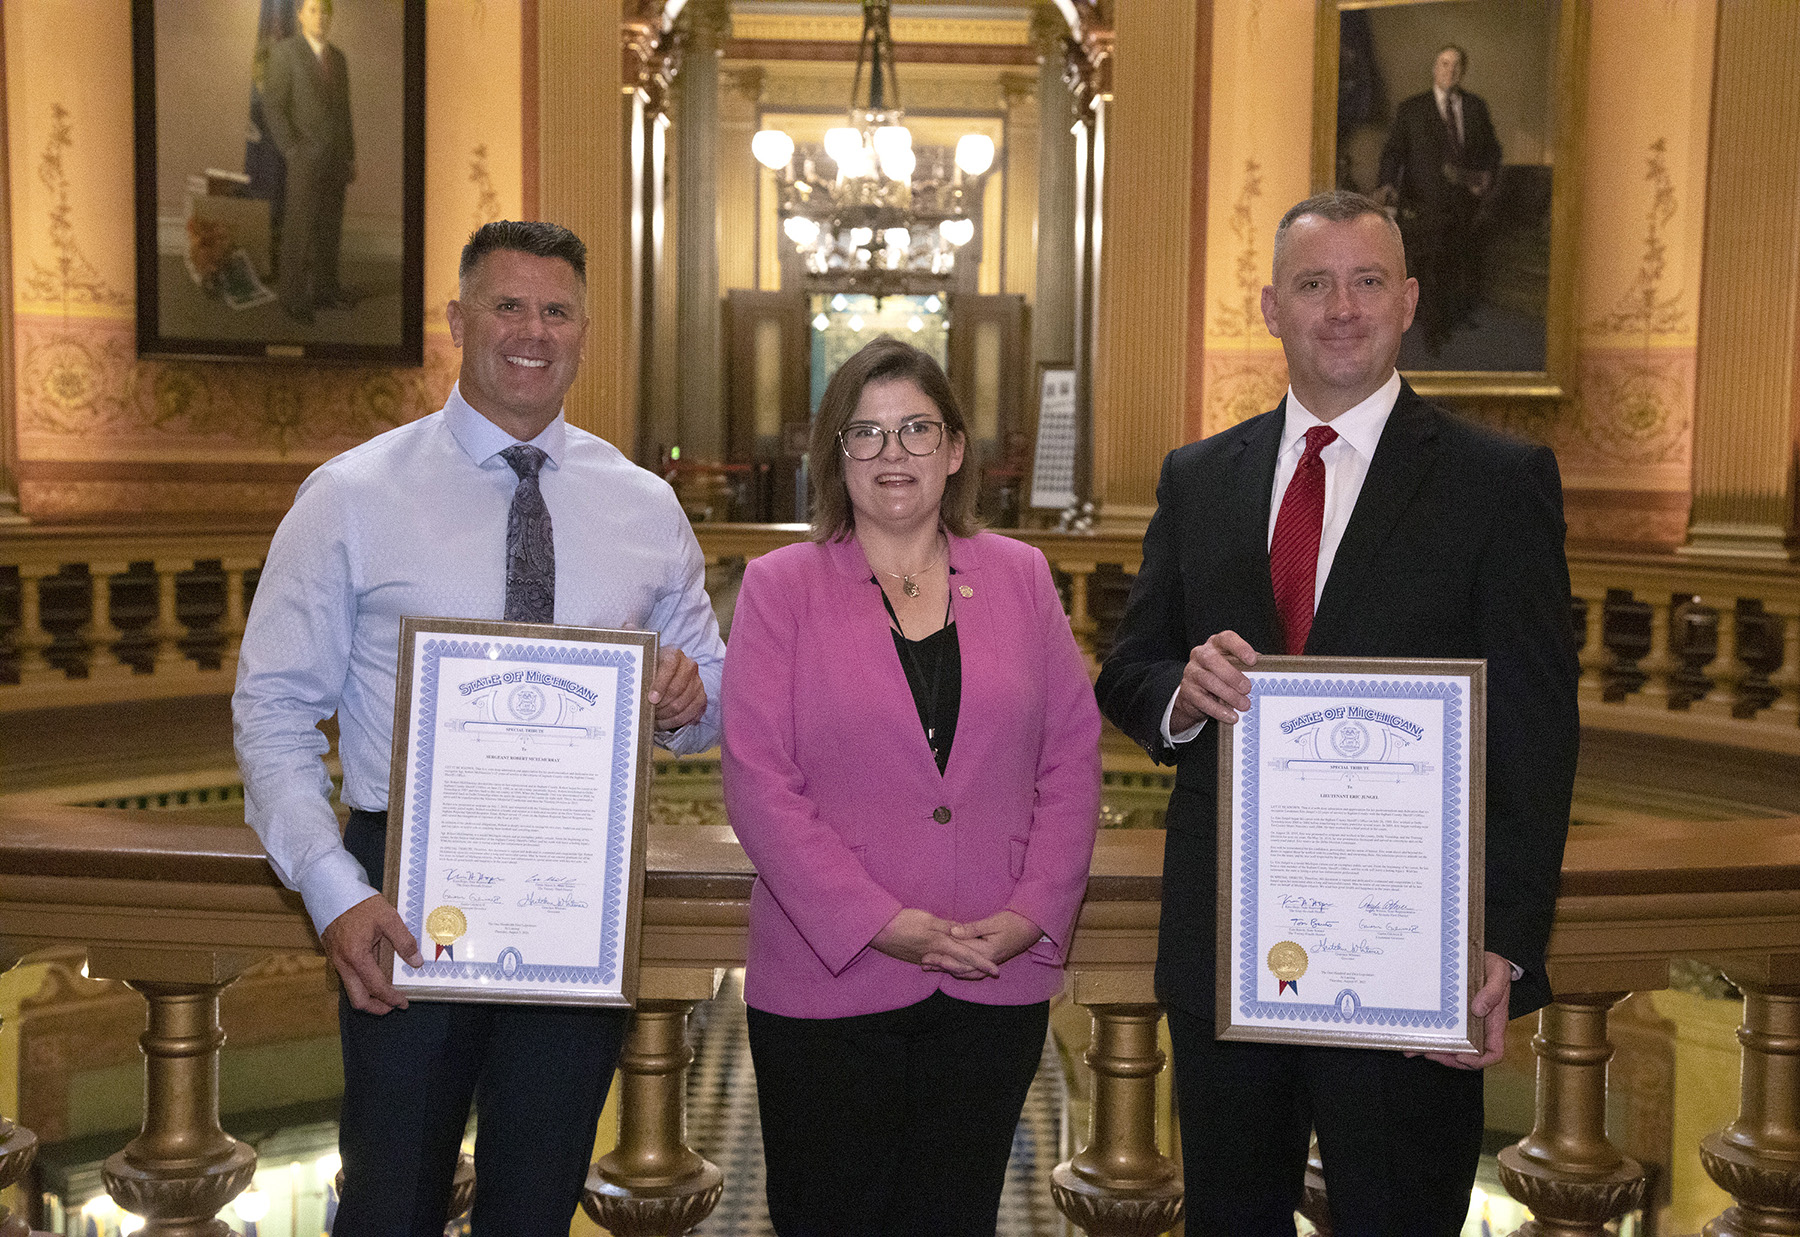 State Rep. Hope (D-Holt) presented tributes to Lieutenant Eric Jungel and Sergeant Robert McElmurray in the Capitol rotunda to congratulate them on their retirement from the Ingham County Sheriff's Office, on August 26, 2021.